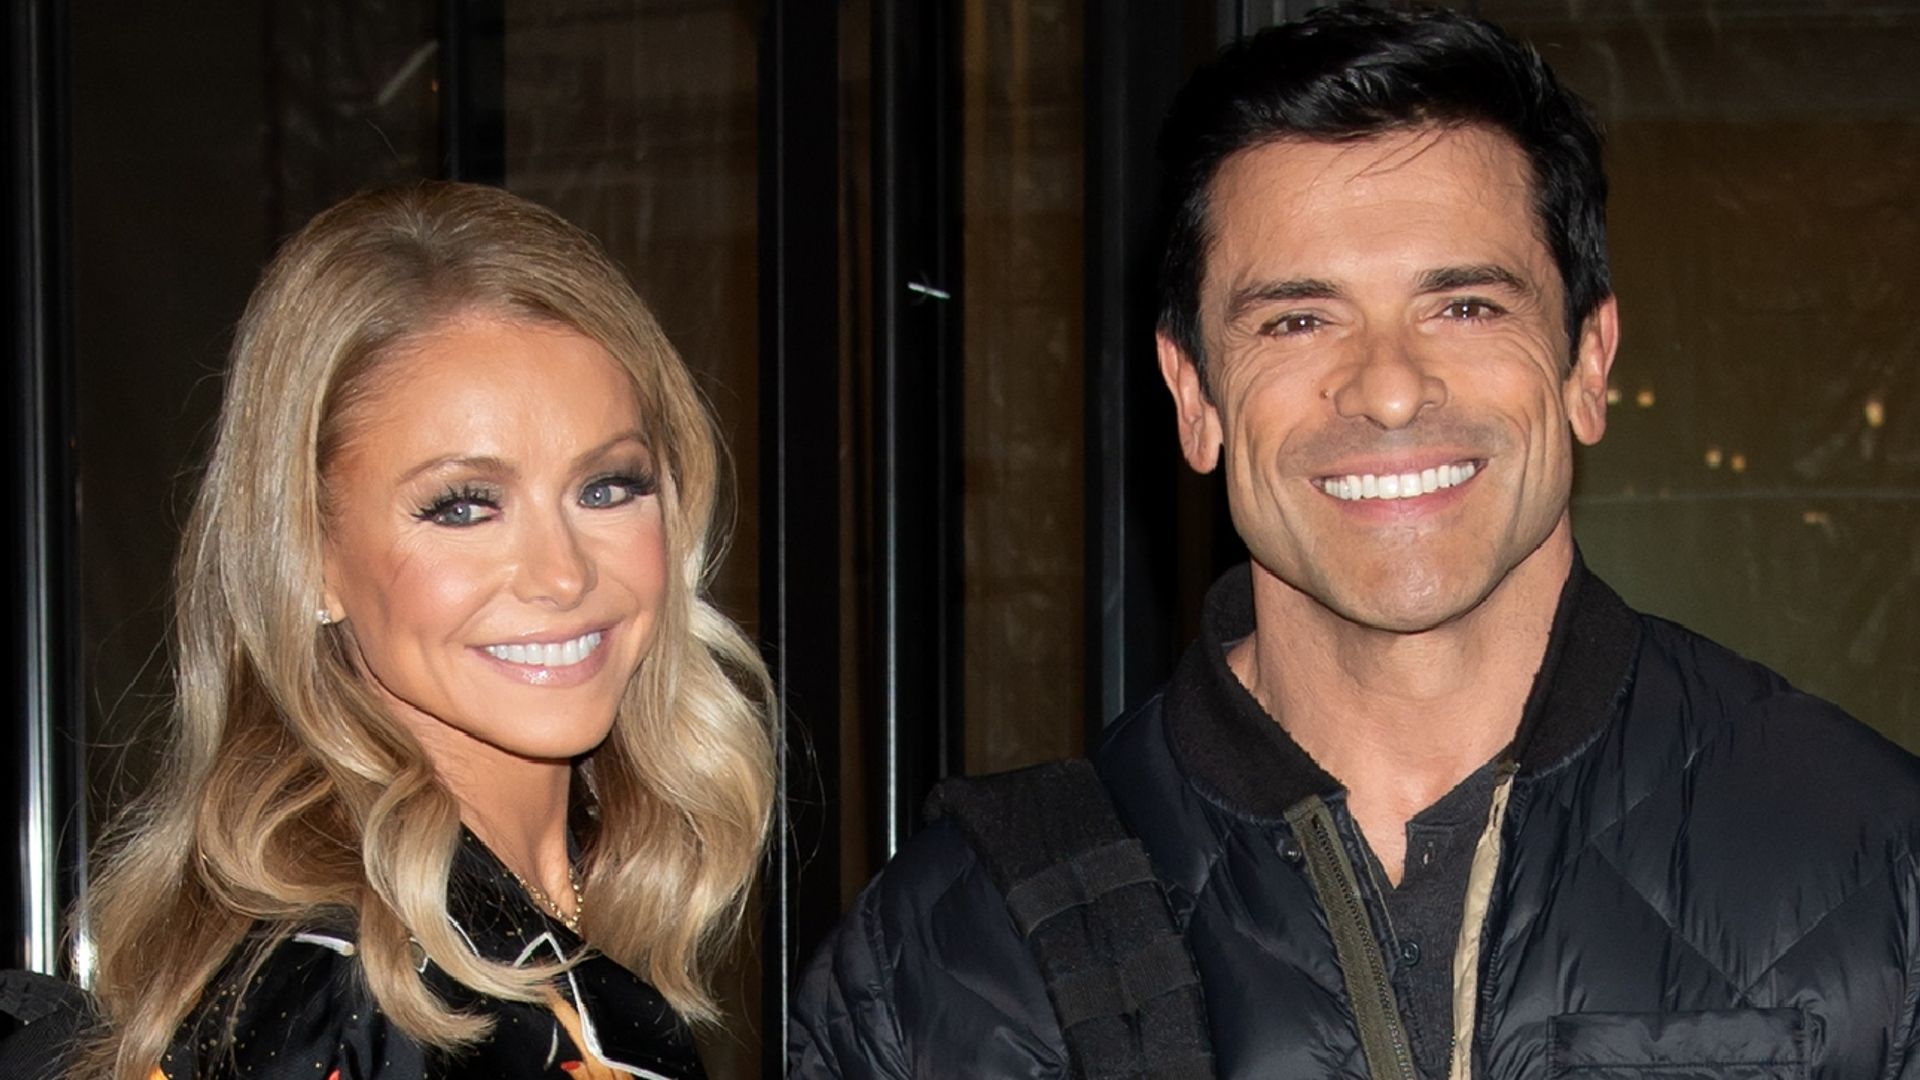 Kelly Ripa and Mark Consuelos are seen out and about on March 4, 2024 in New York, New York. (Photo by MEGA/GC Images)